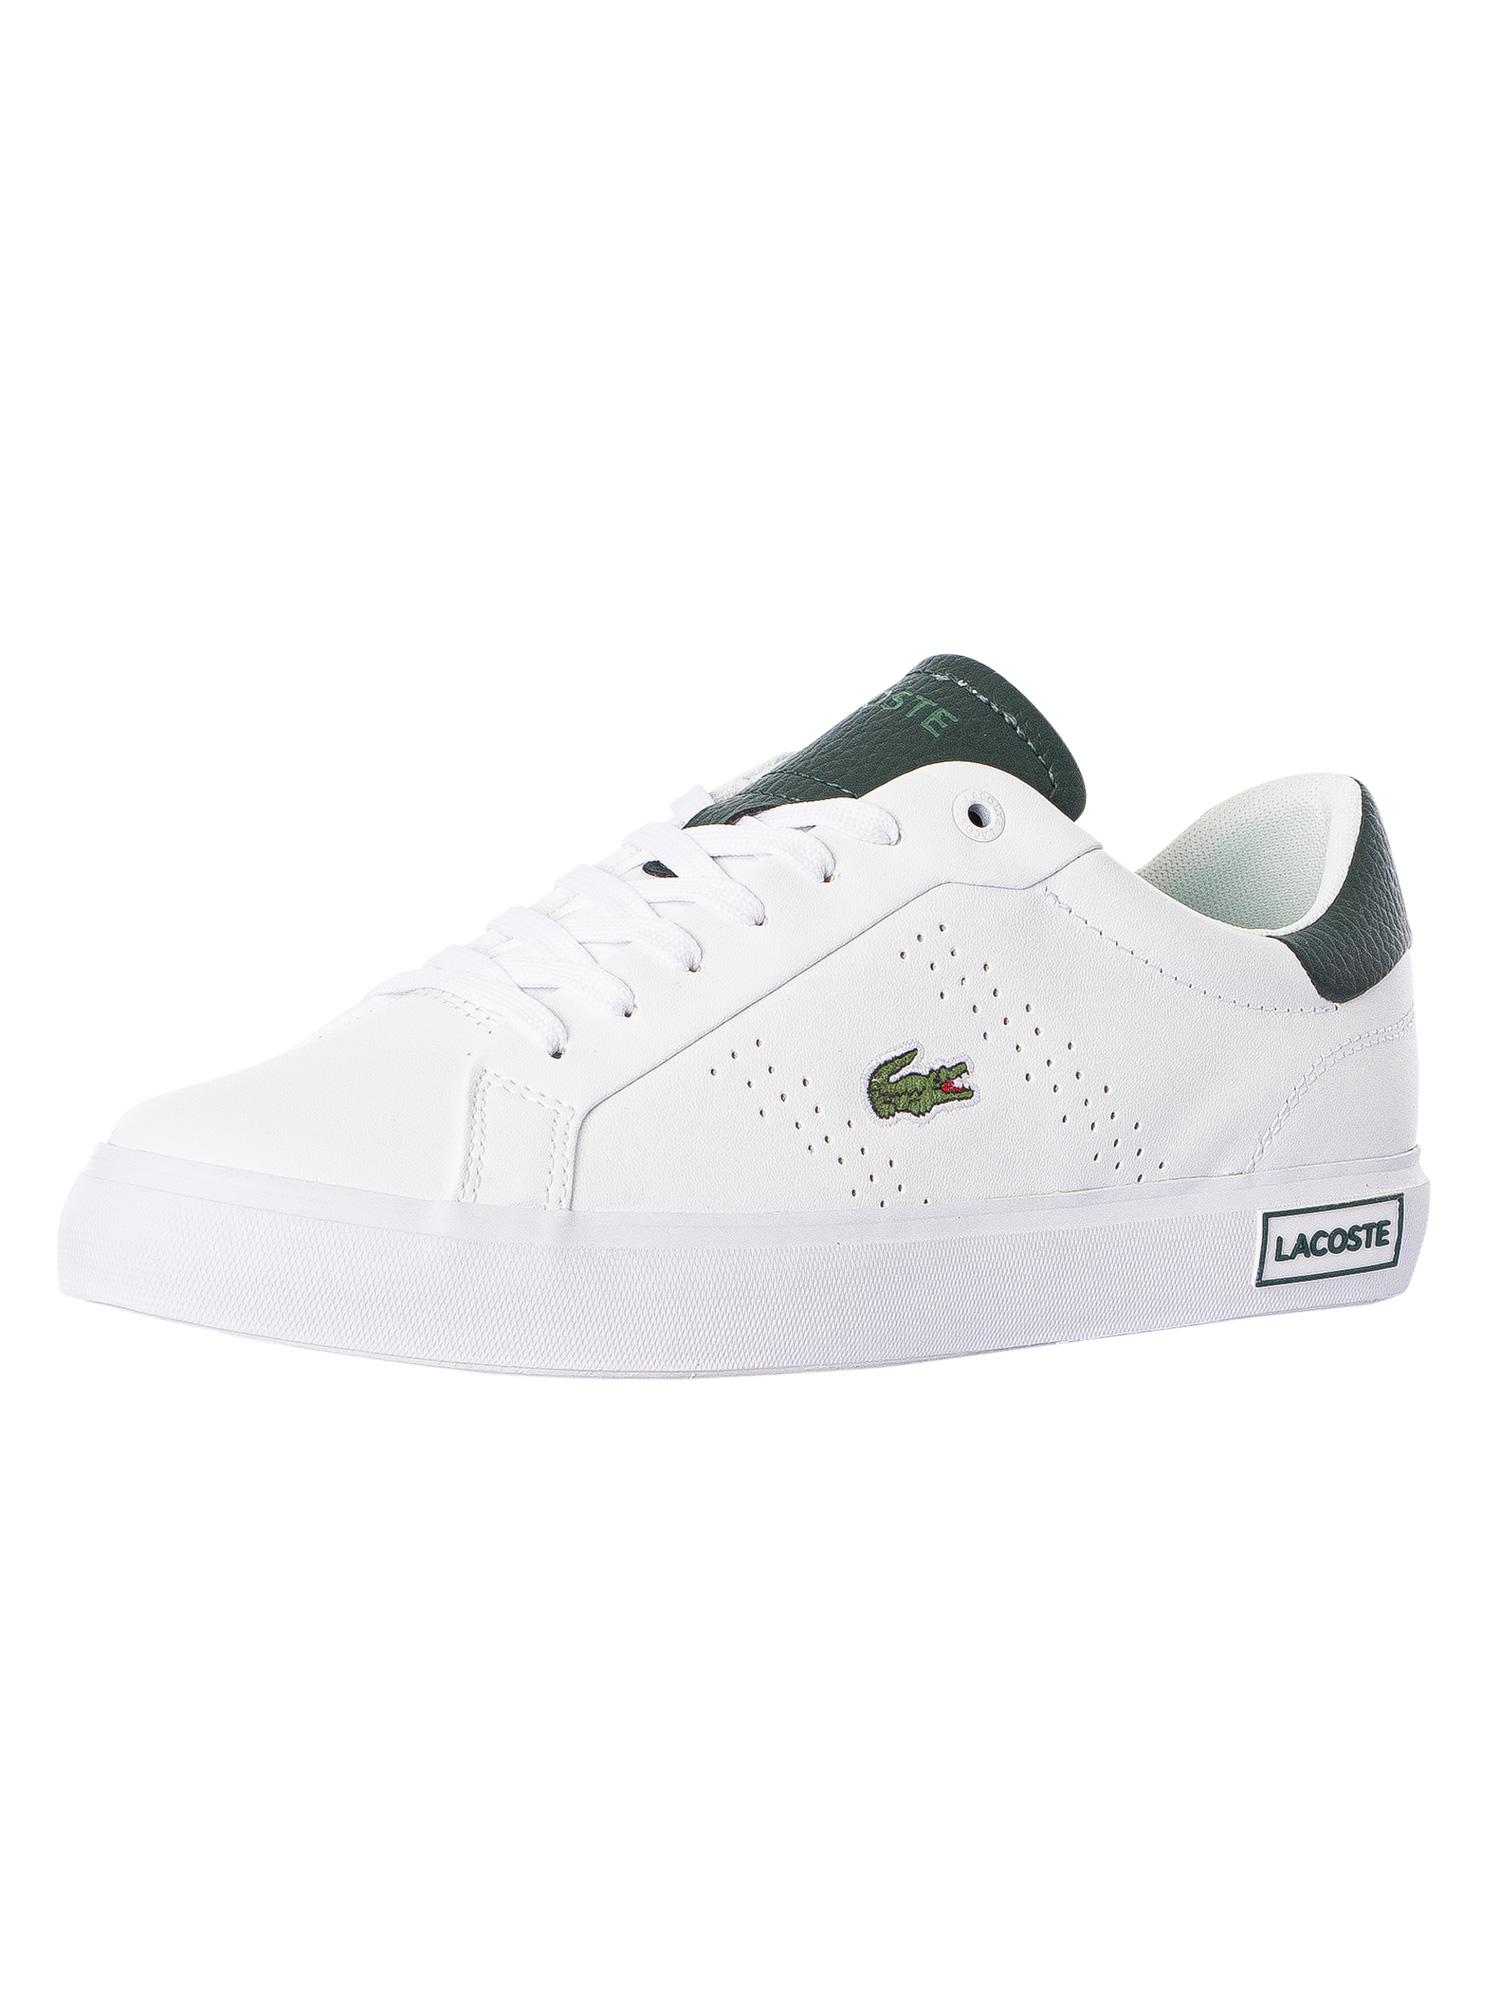 Lacoste Powercourt 2.0 123 Sma Leather Trainers in White for Men | Lyst